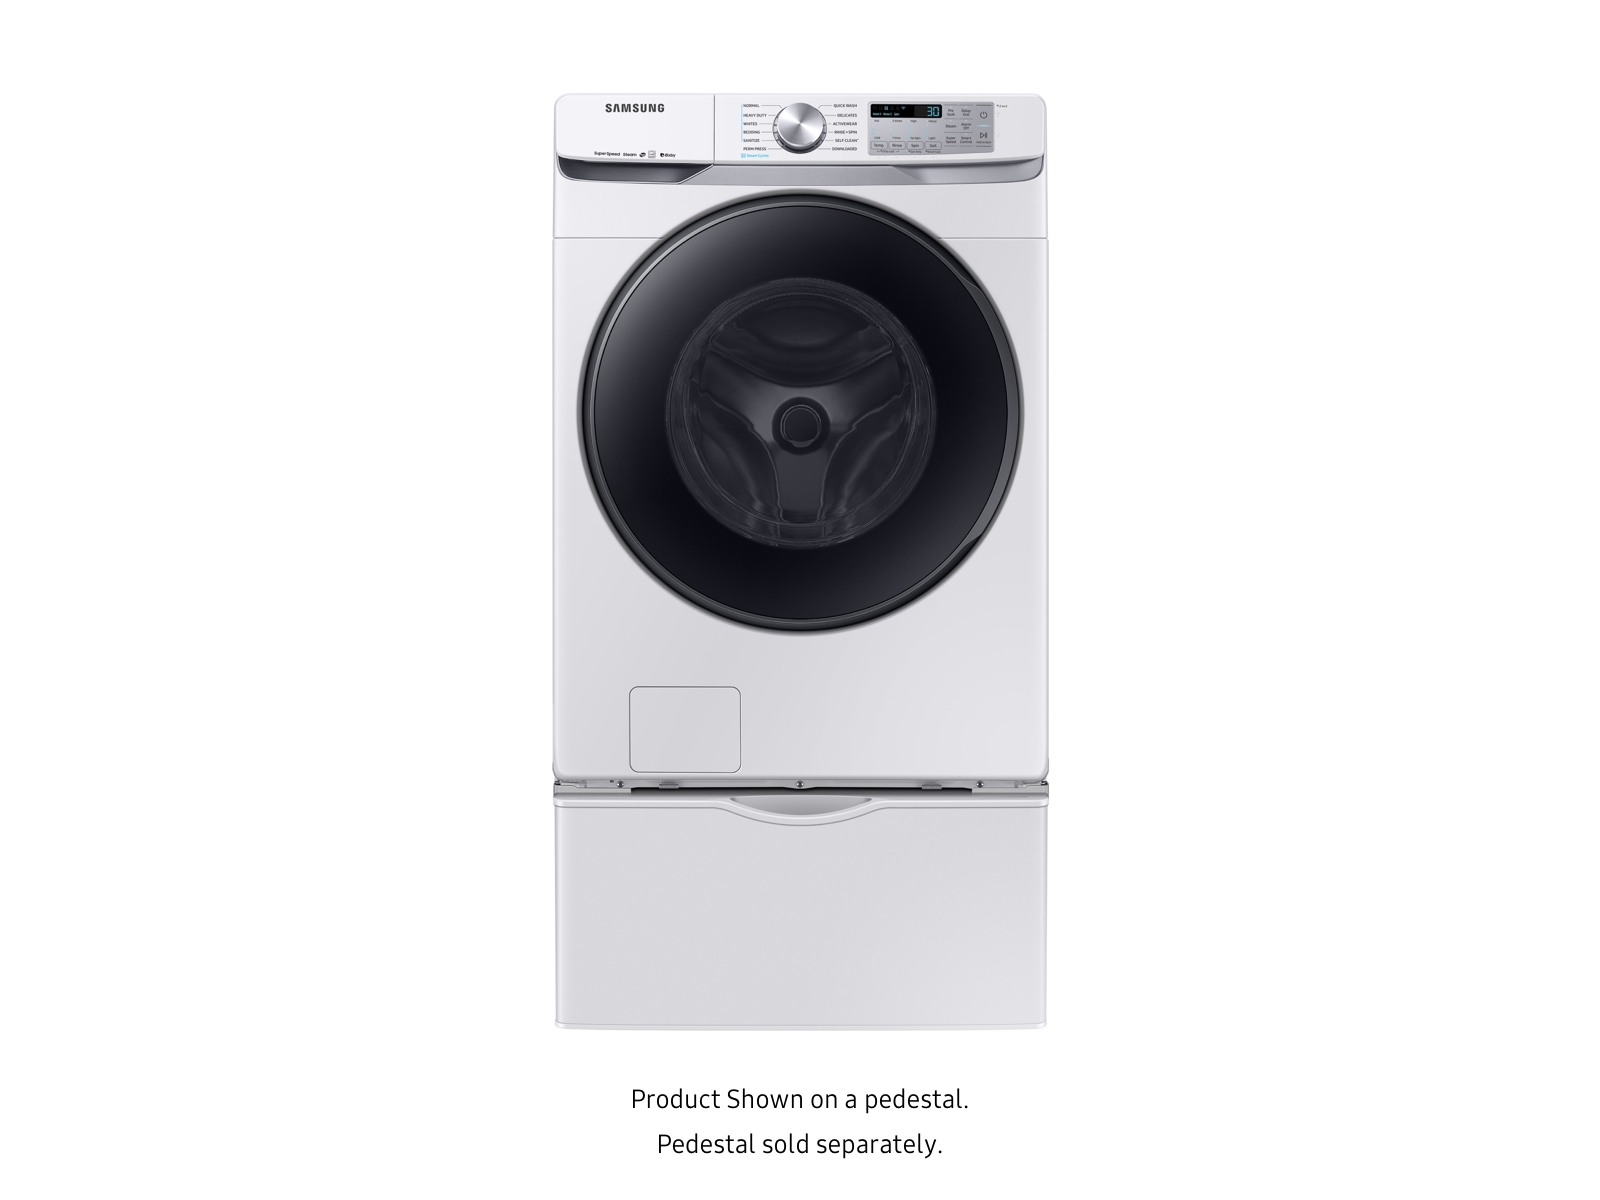 https://image-us.samsung.com/SamsungUS/home/home-appliances/washers/front-load/pd/wf50r8500aw-us/gallery-white/8500WhiteWasher004.jpg?$product-details-jpg$